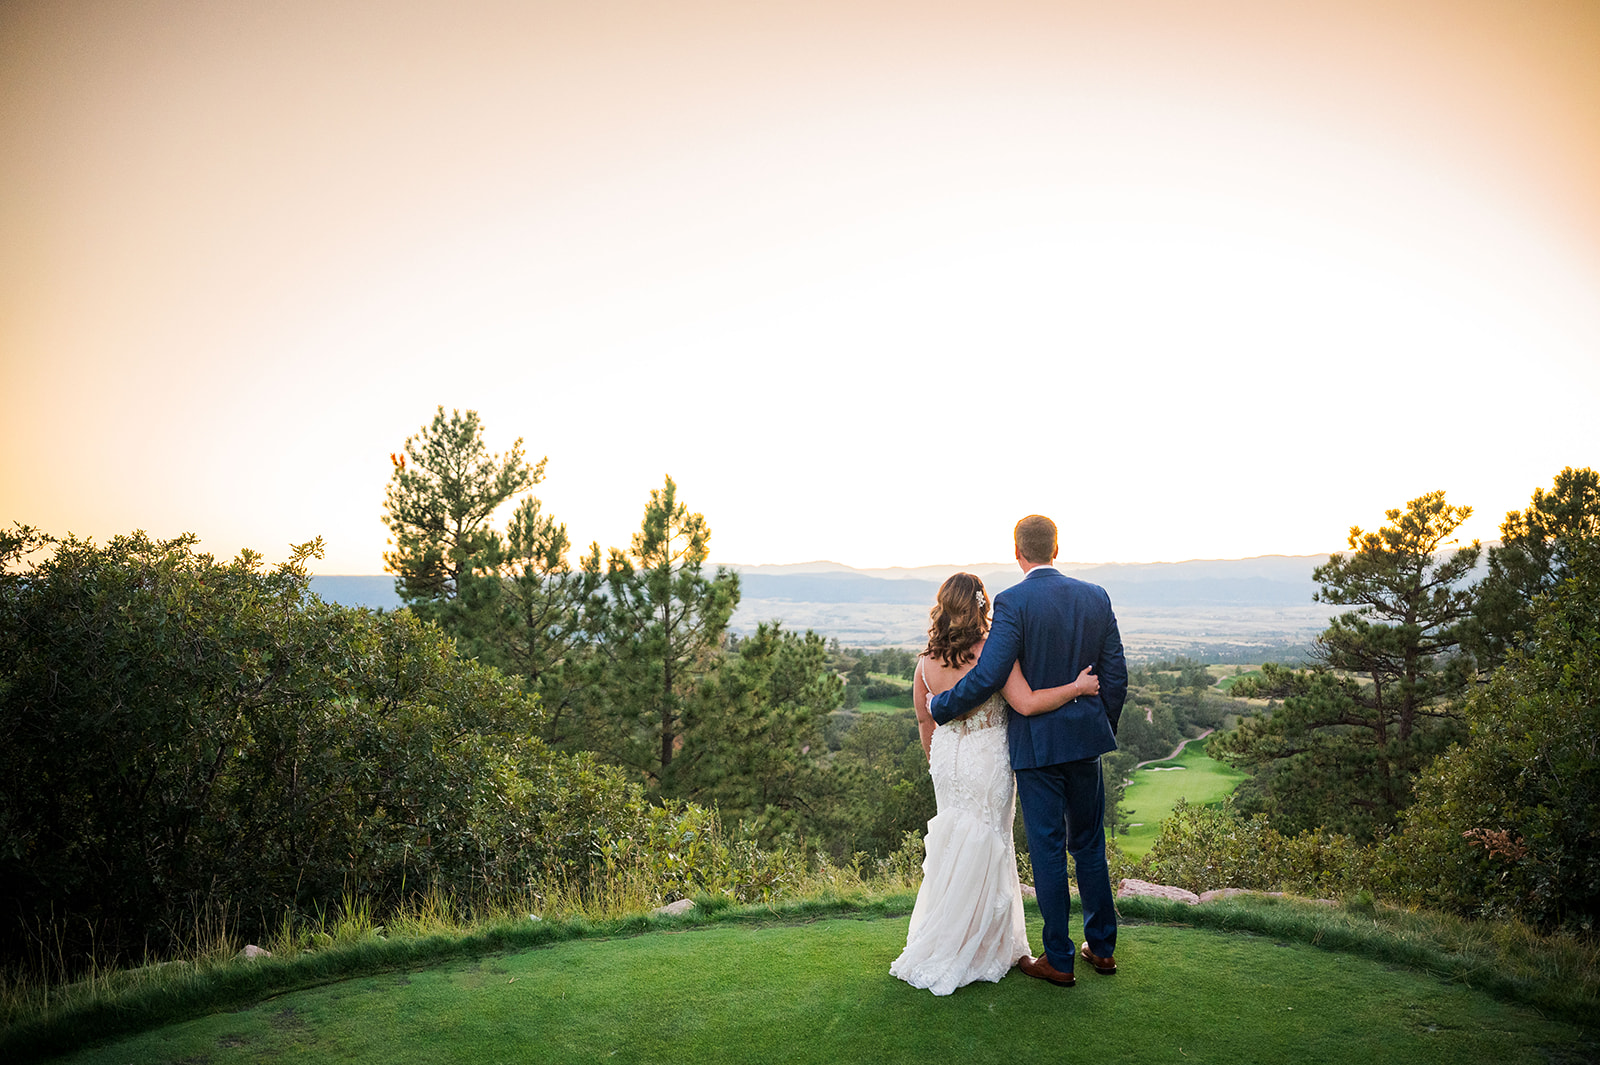 The bride and groom faced away from the camera looking out at the Colorado landscape at golden hour.